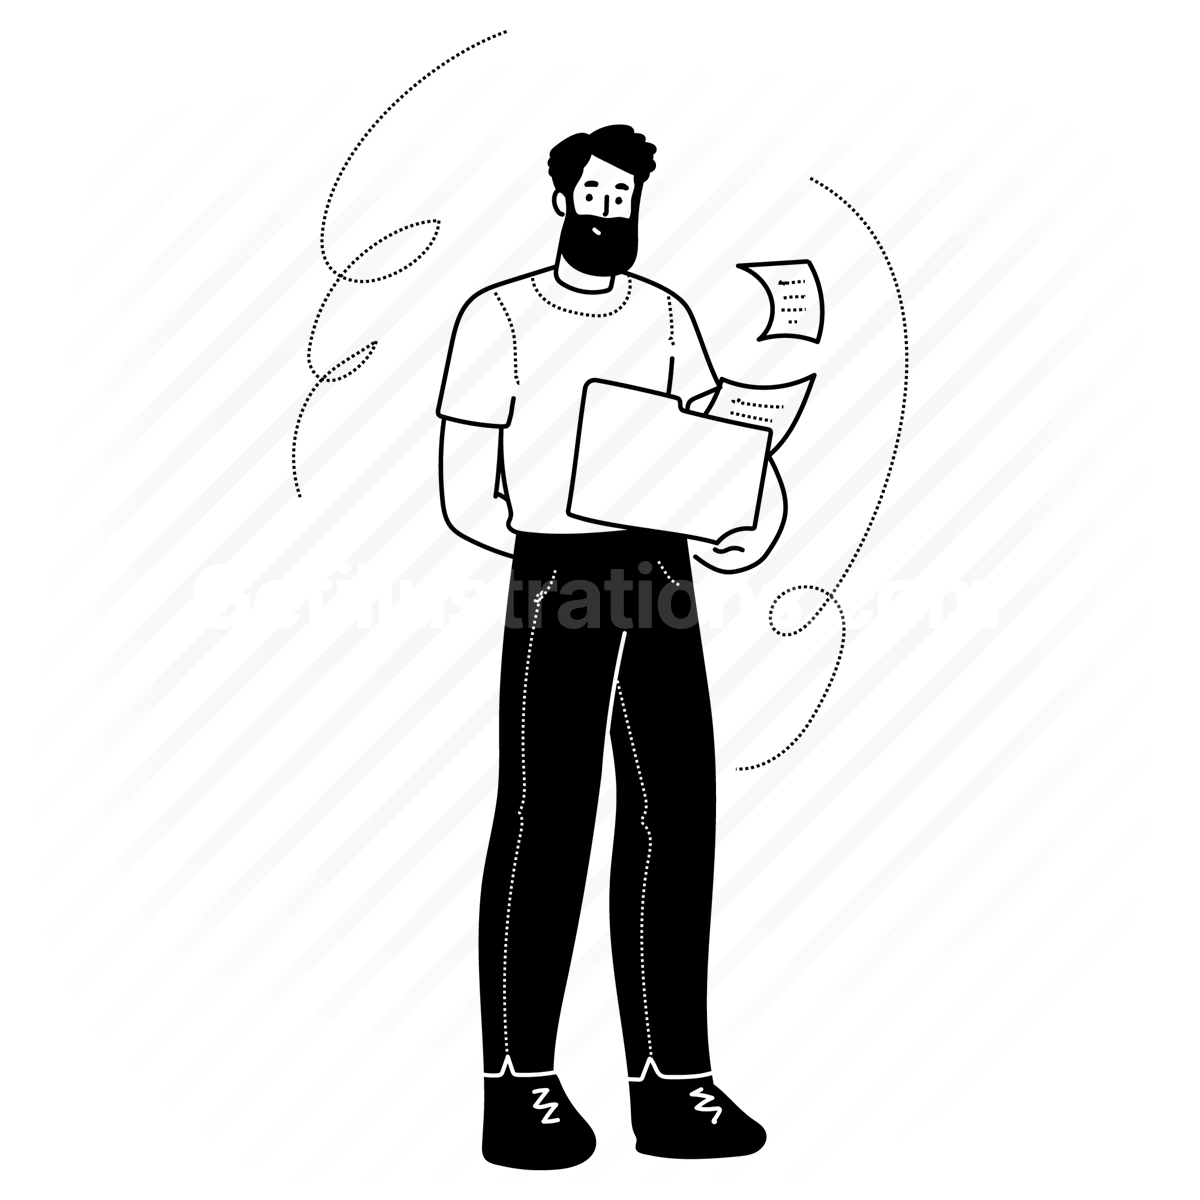 file, folder, archive, filing, document, paper, page, man, people